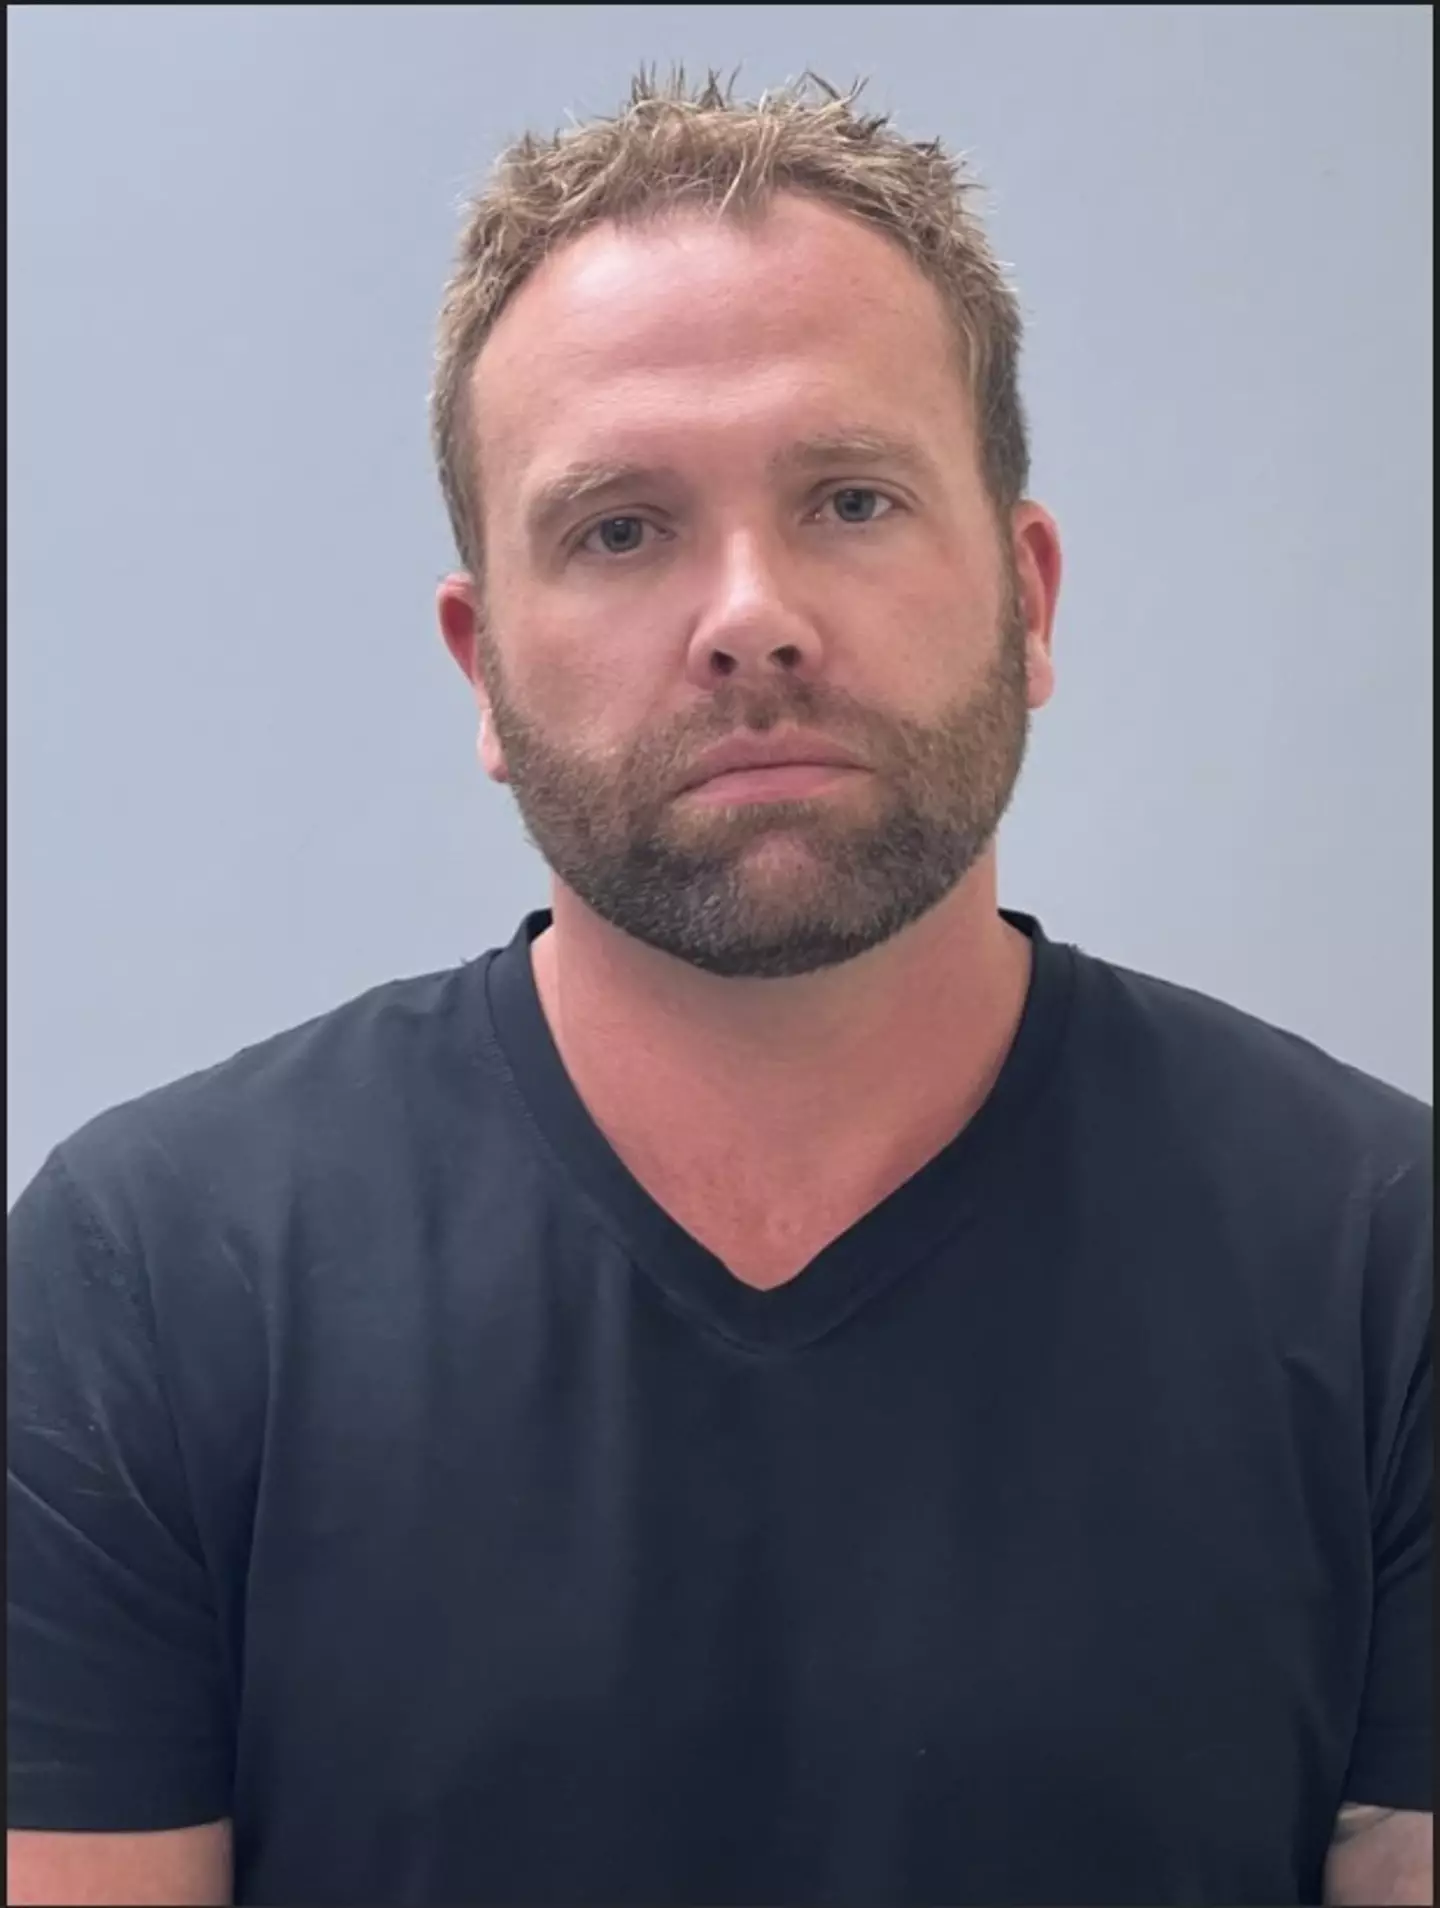 Plastic surgeon Benjamin Jacob Brown, in Florida, has been arrested and charged in connection with the death of his wife (Santa Rosa County Sheriff's Office FL)